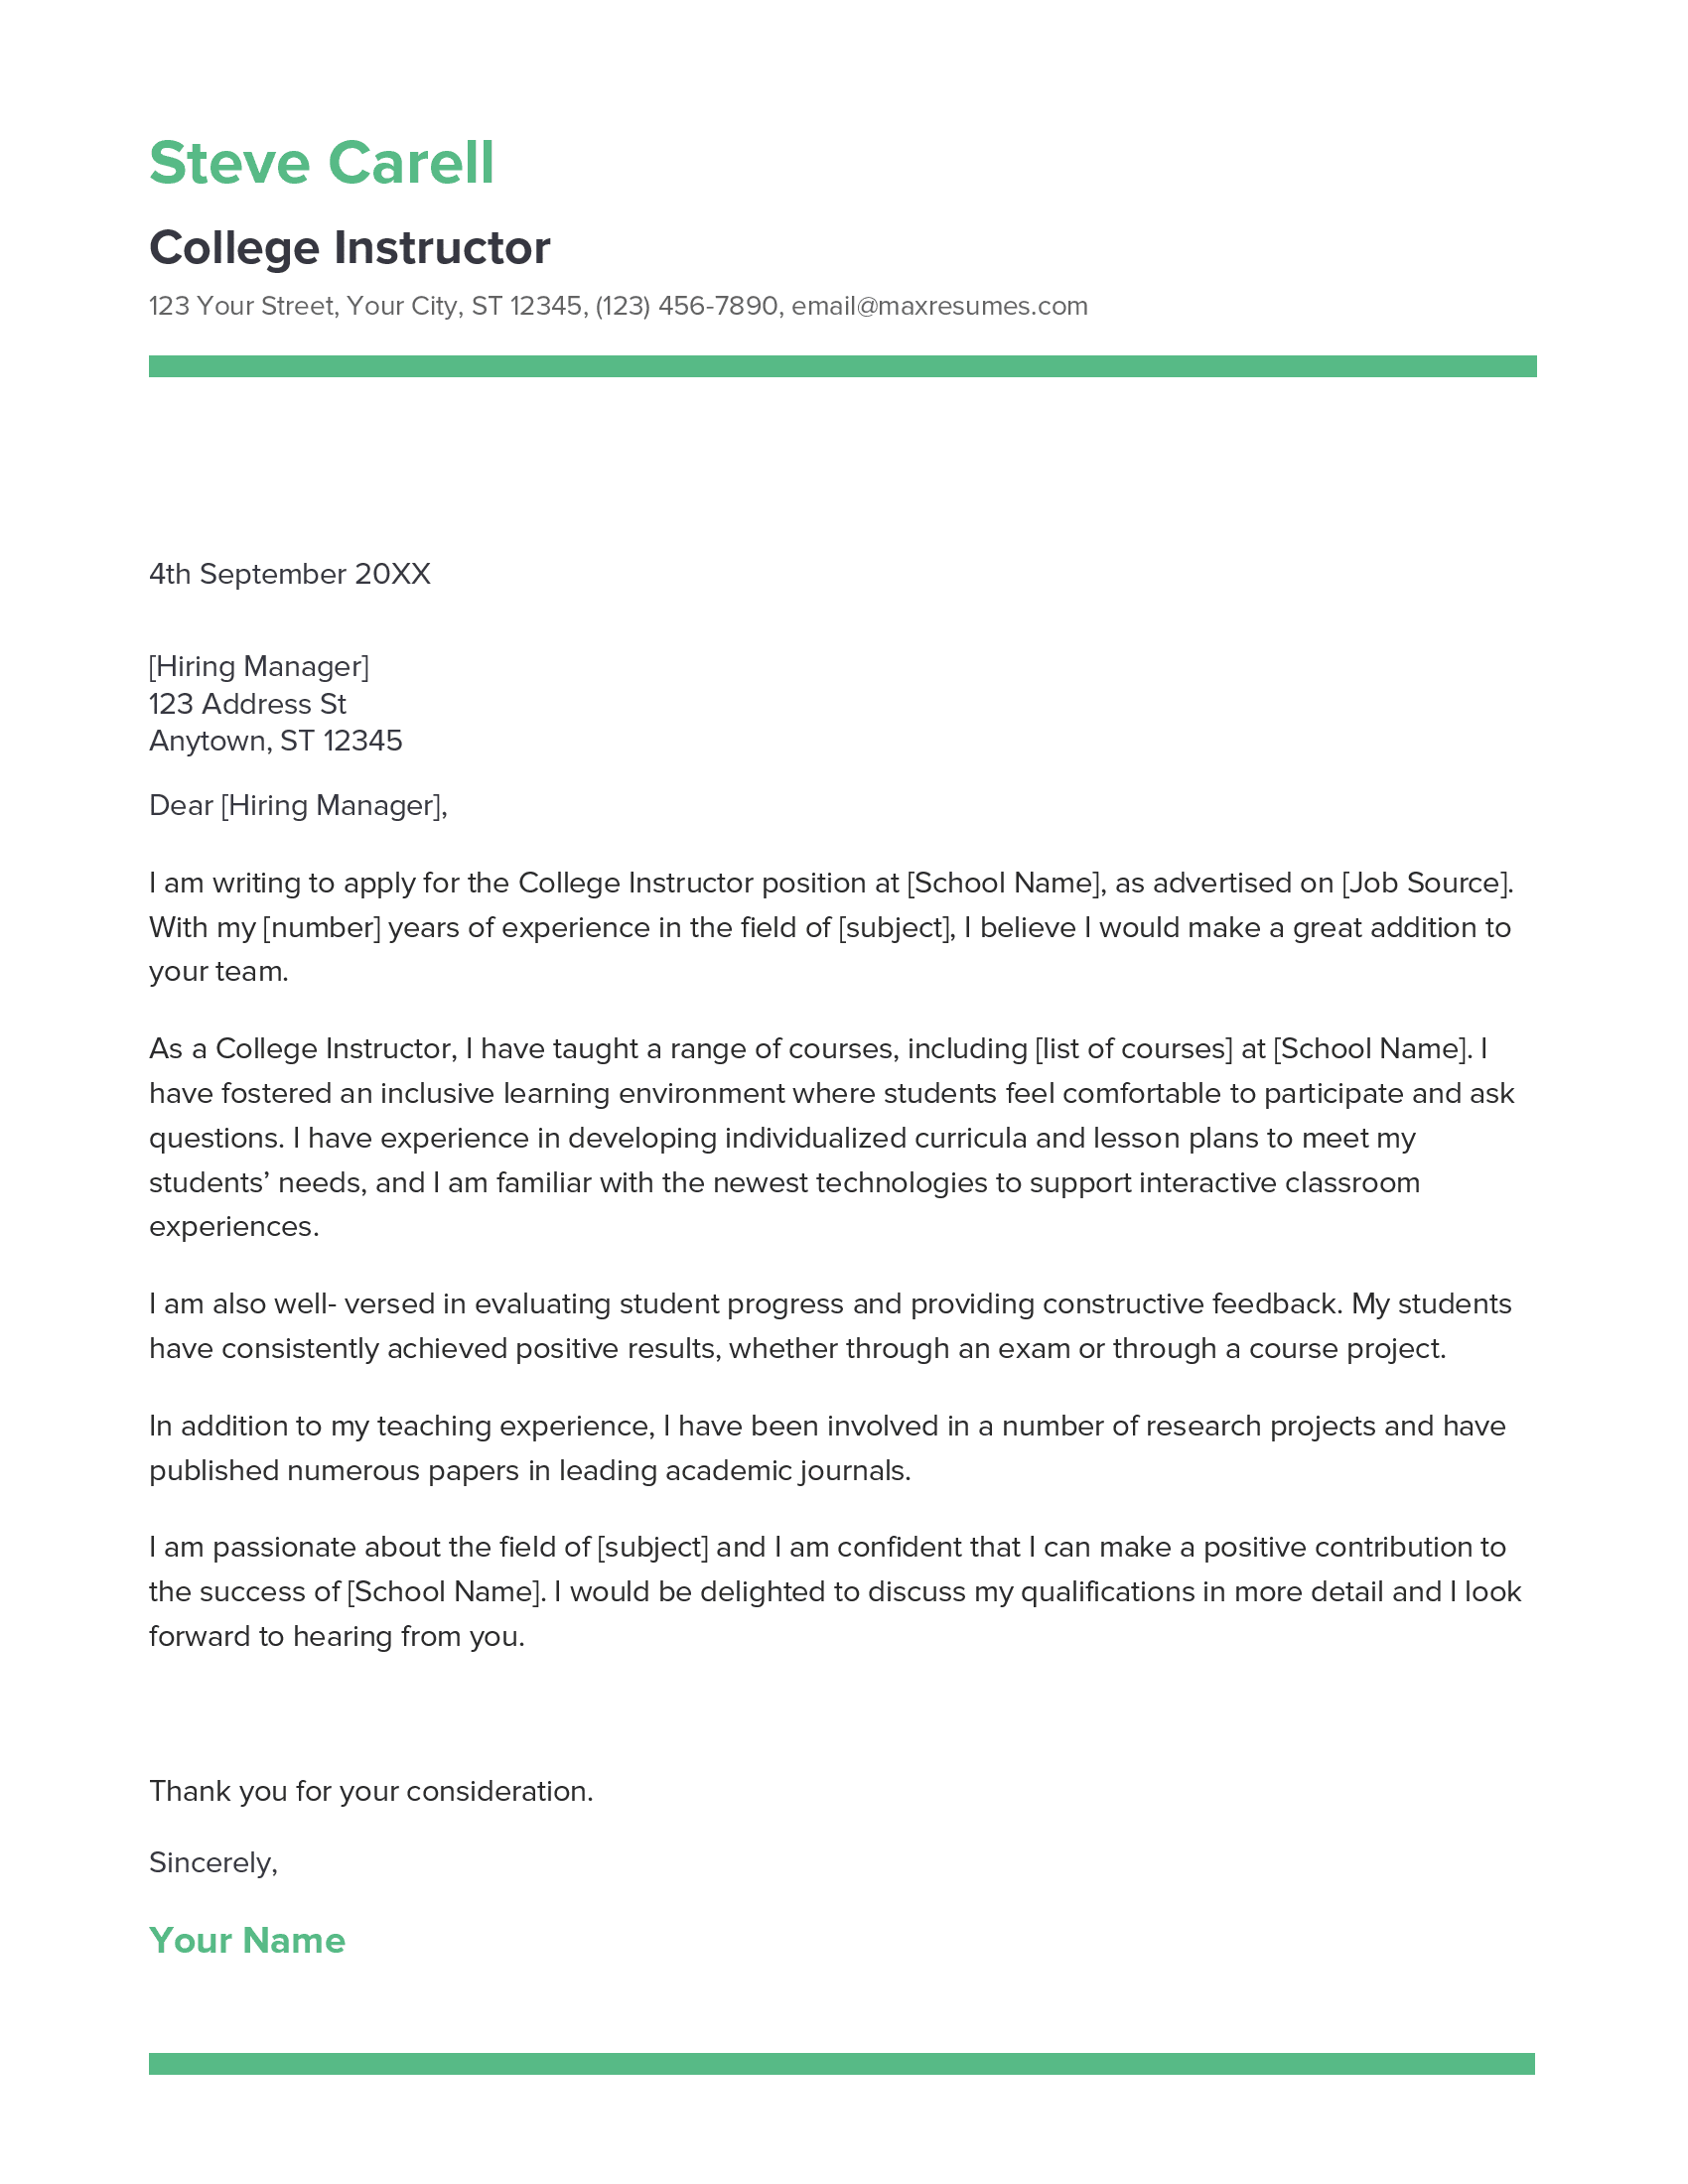 College Instructor Cover Letter Example